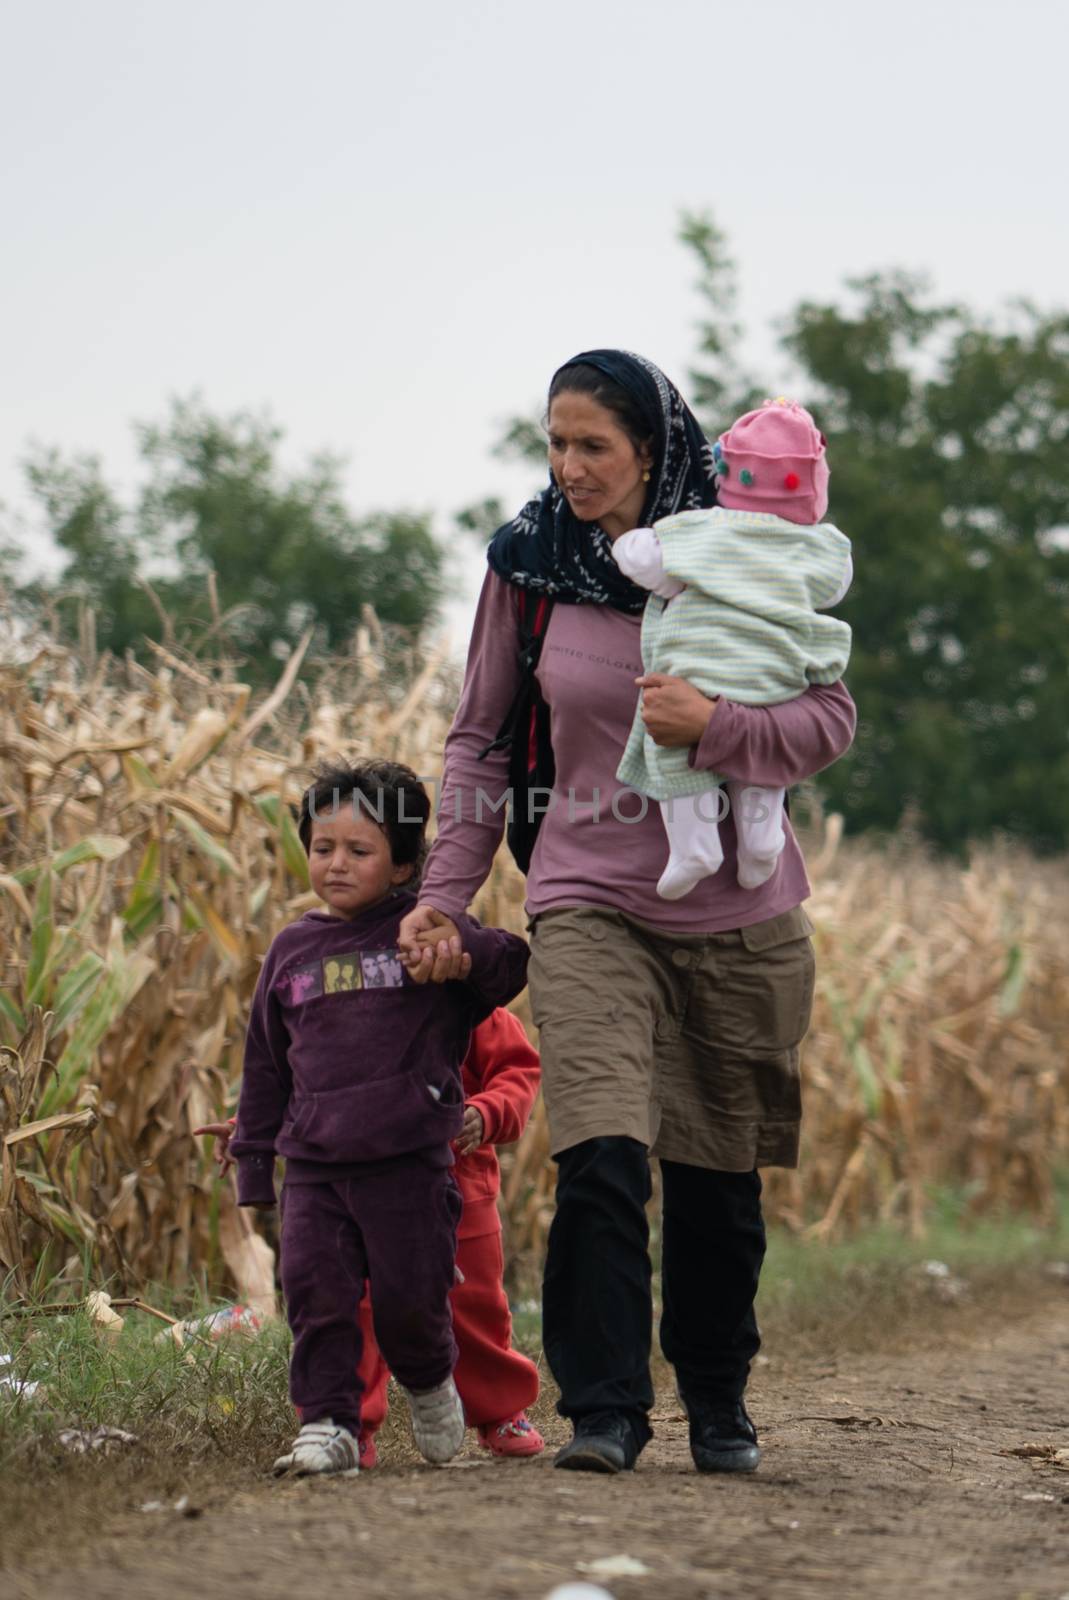 SERBIA, Berkasovo: A family of Middle Eastern refugees cross fields in the Serbian town of Berkasovo, on the border with Croatia on September 24, 2015. 